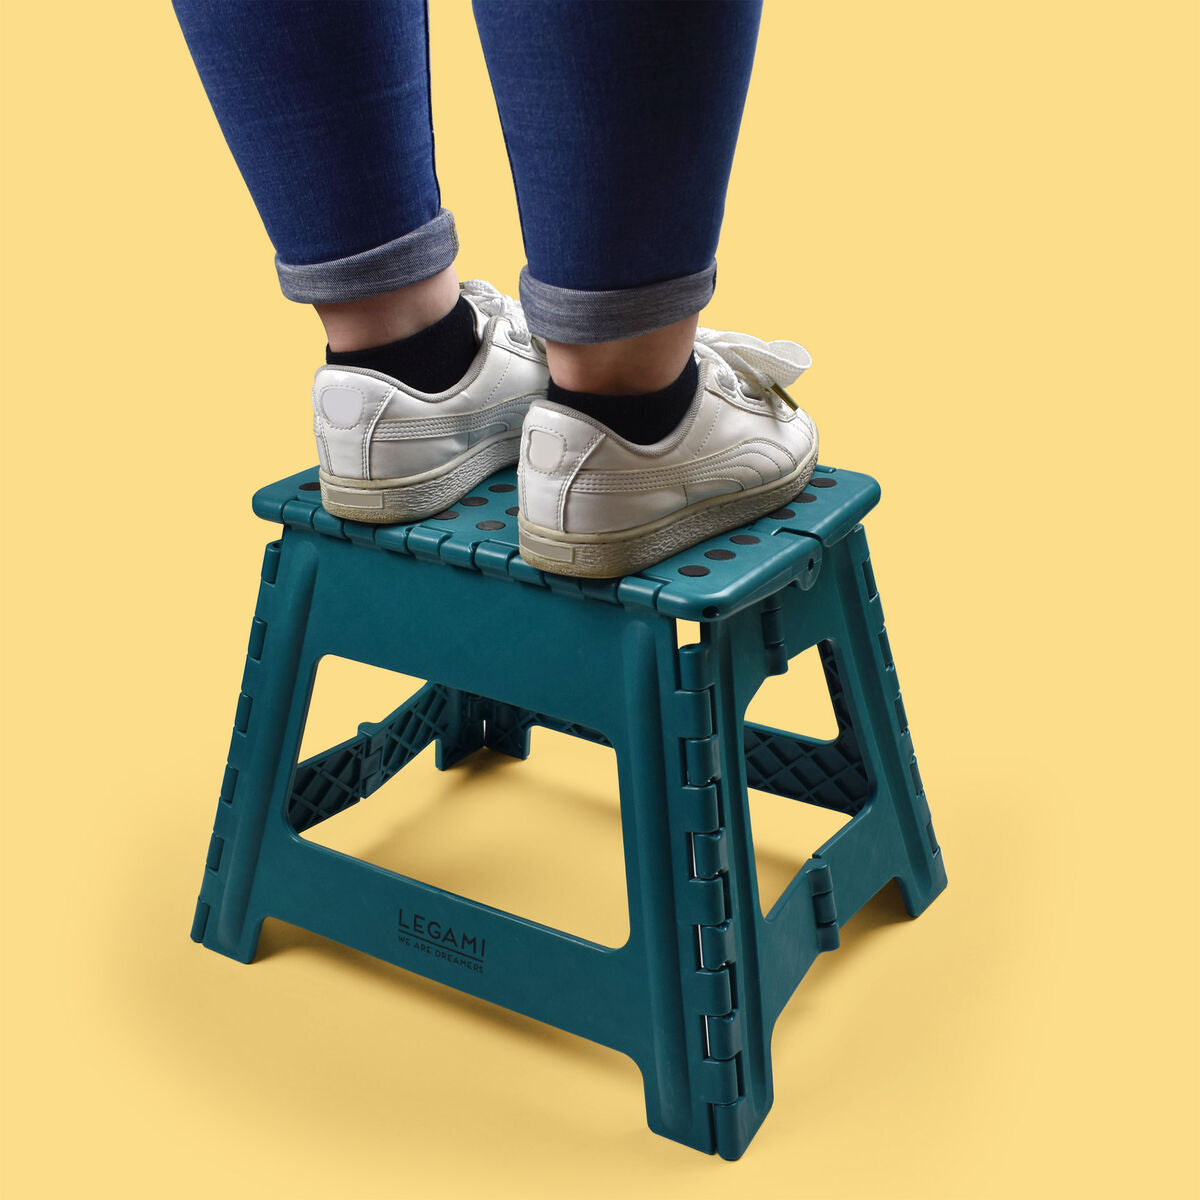 Fab Gifts | Legami Folding Stool  by Weirs of Baggot Street